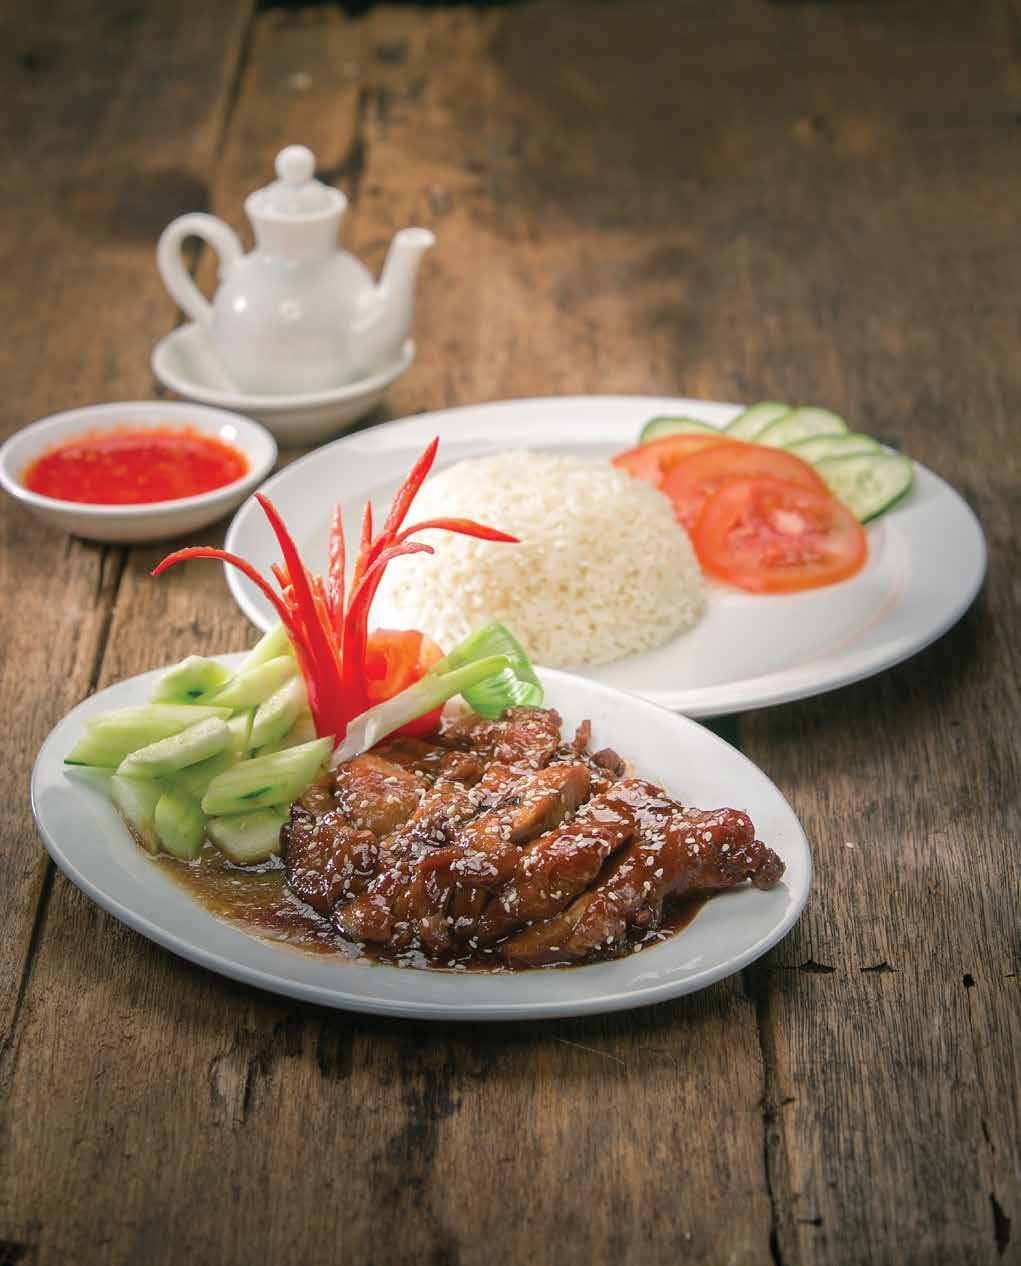 HAVEN SEASONED BARBECUE CHICKEN RICE specially selected Regal Wu-Soo